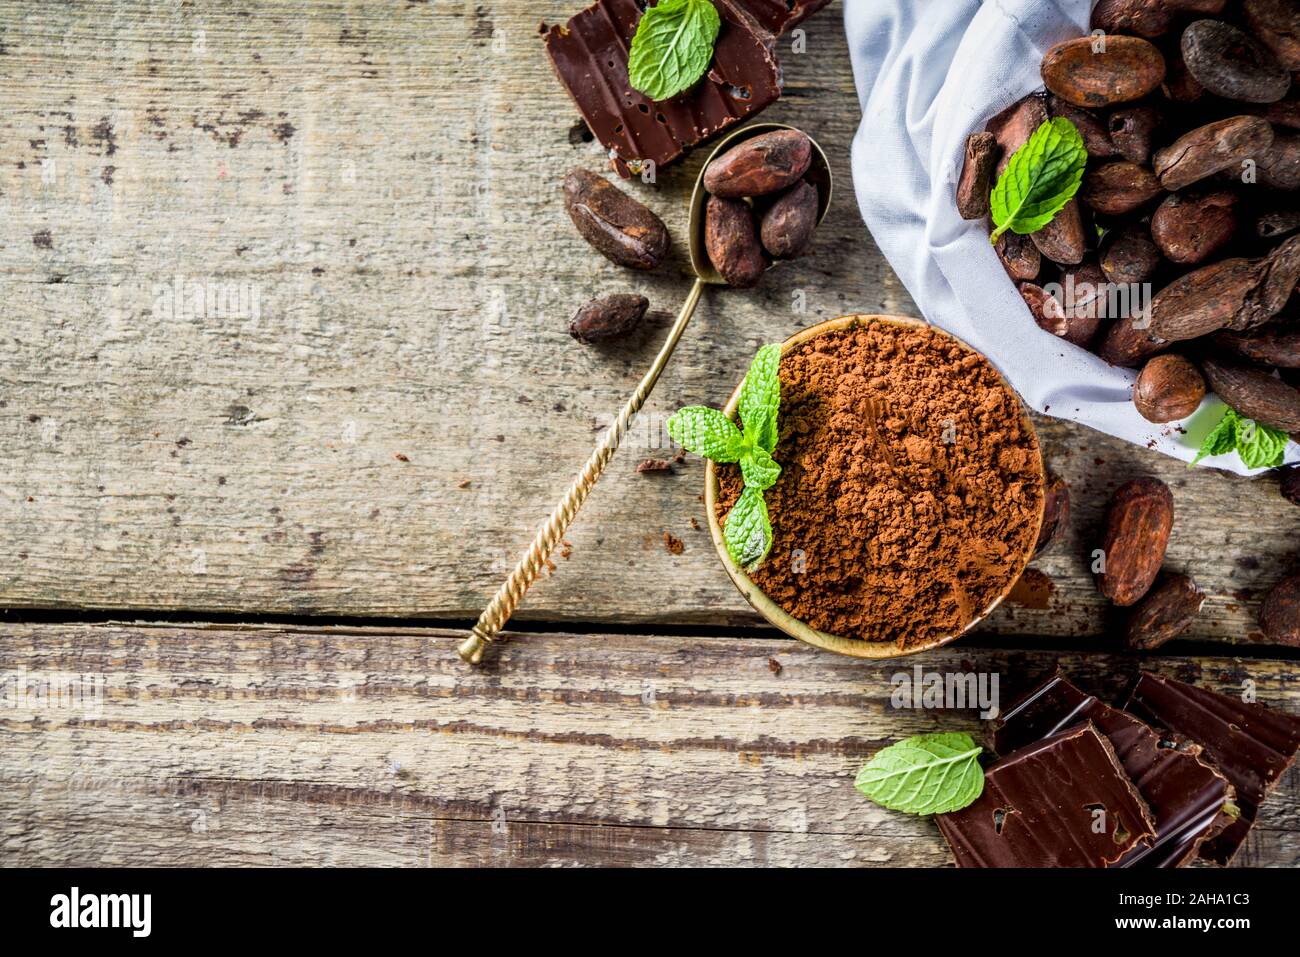 Different conditions of cocoa. Various cocoa - beans, beans, ground, crushed cocoa powder, chocolate paste, chocolate pieces and hot chocolate in a cu Stock Photo